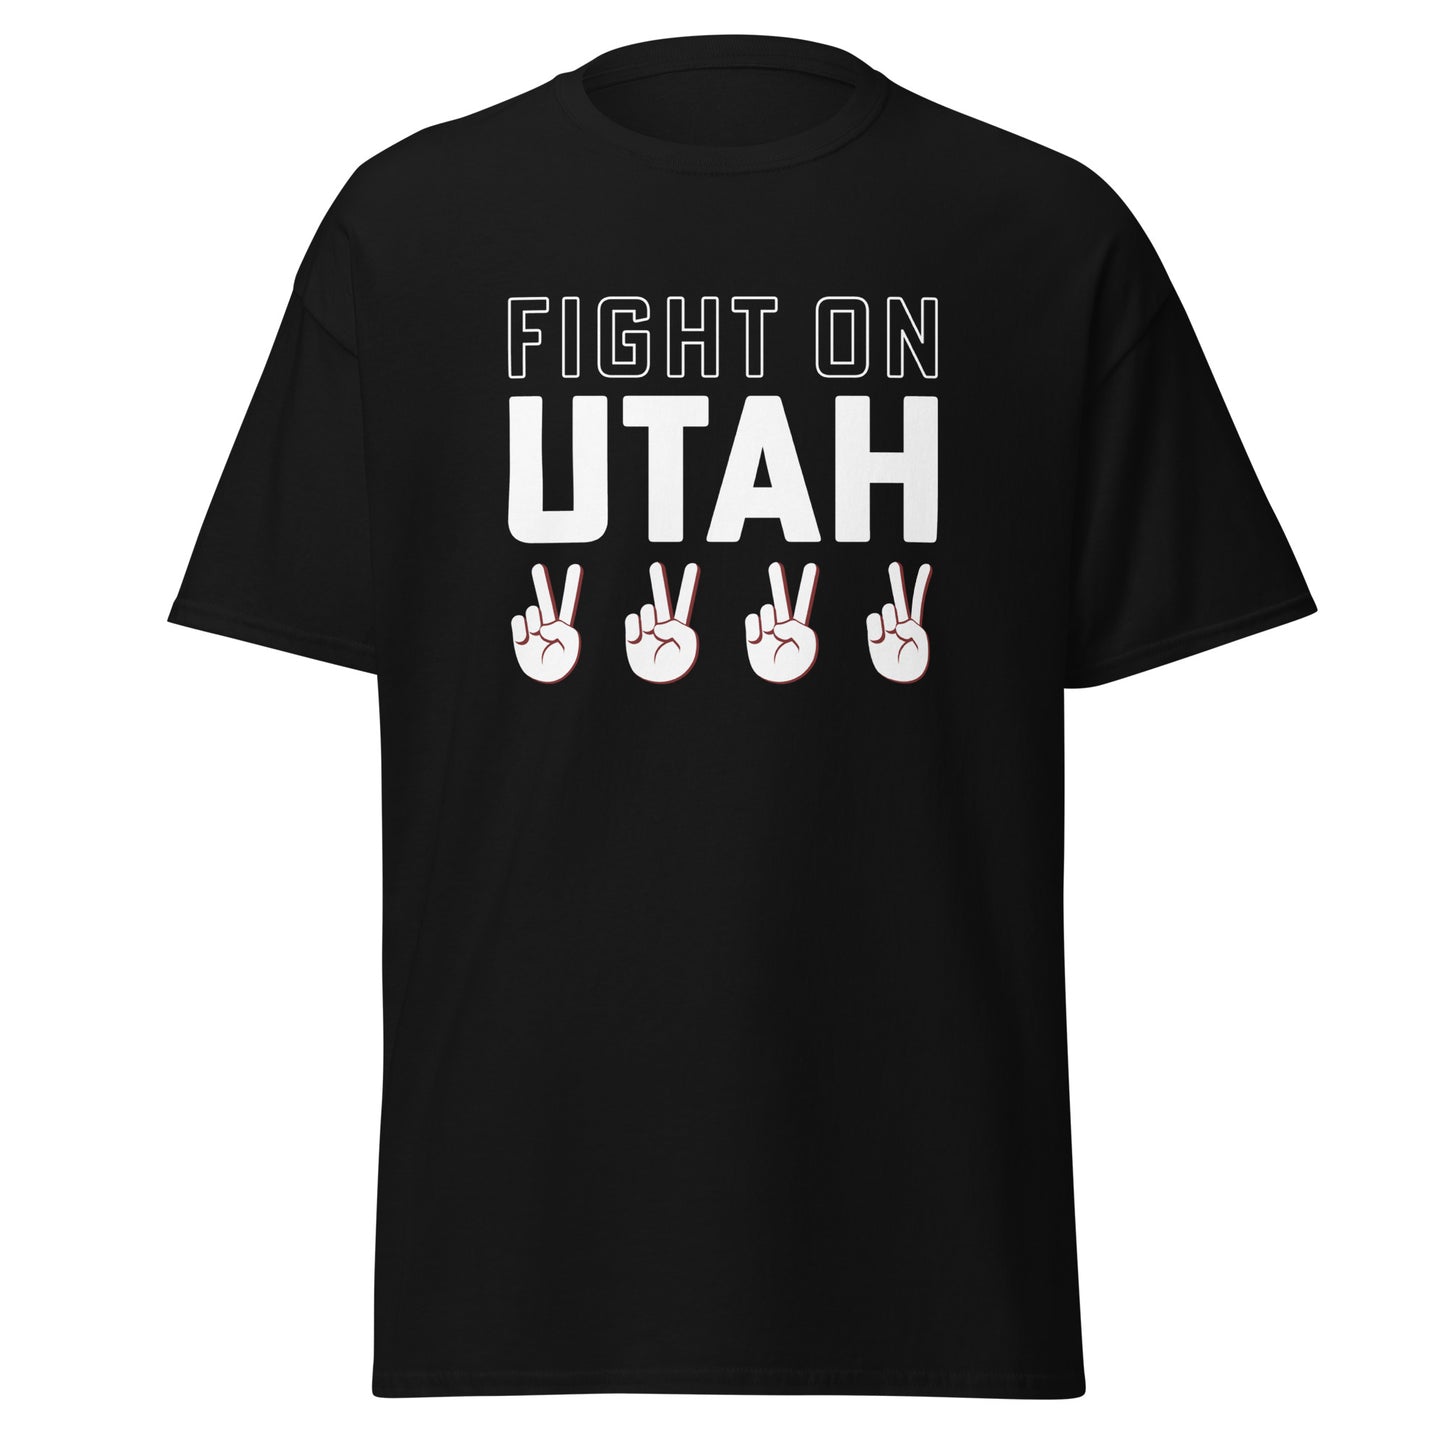 Classic Everyday Fight On Utah 4 In A Row ✌️ Simple USC Tee